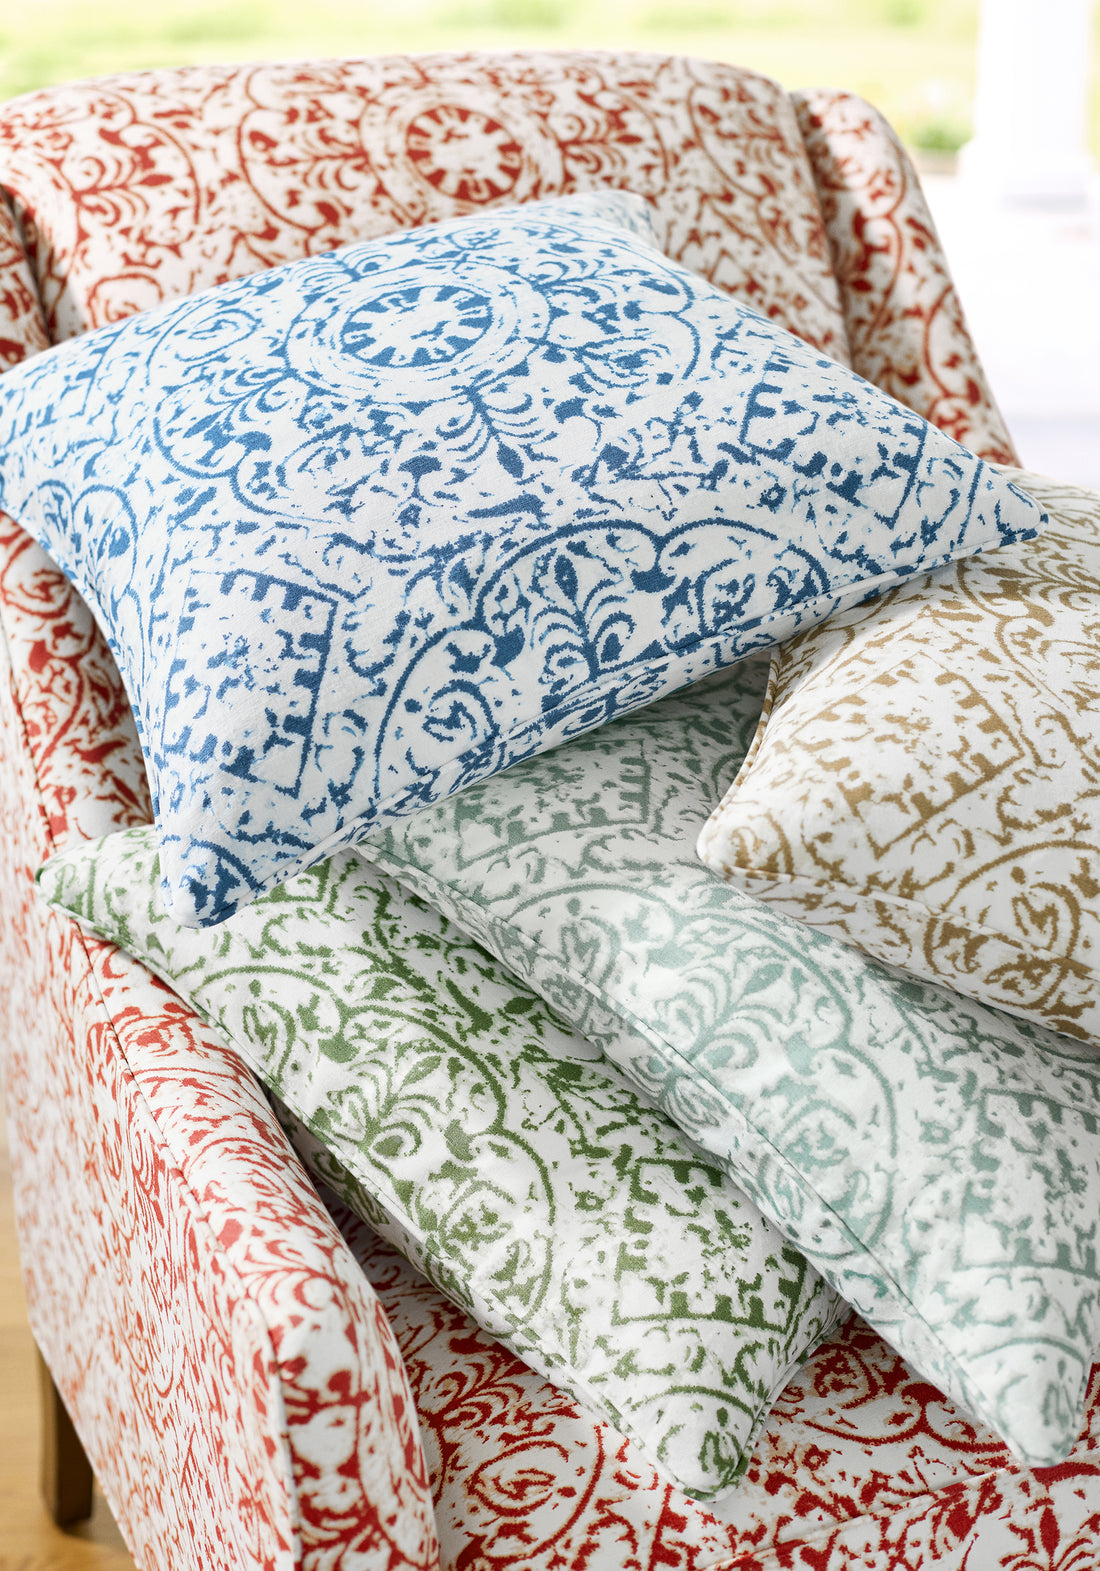 Pillows featuring Havana fabric in spruce color - pattern number F981311 - by Thibaut in the Montecito collection